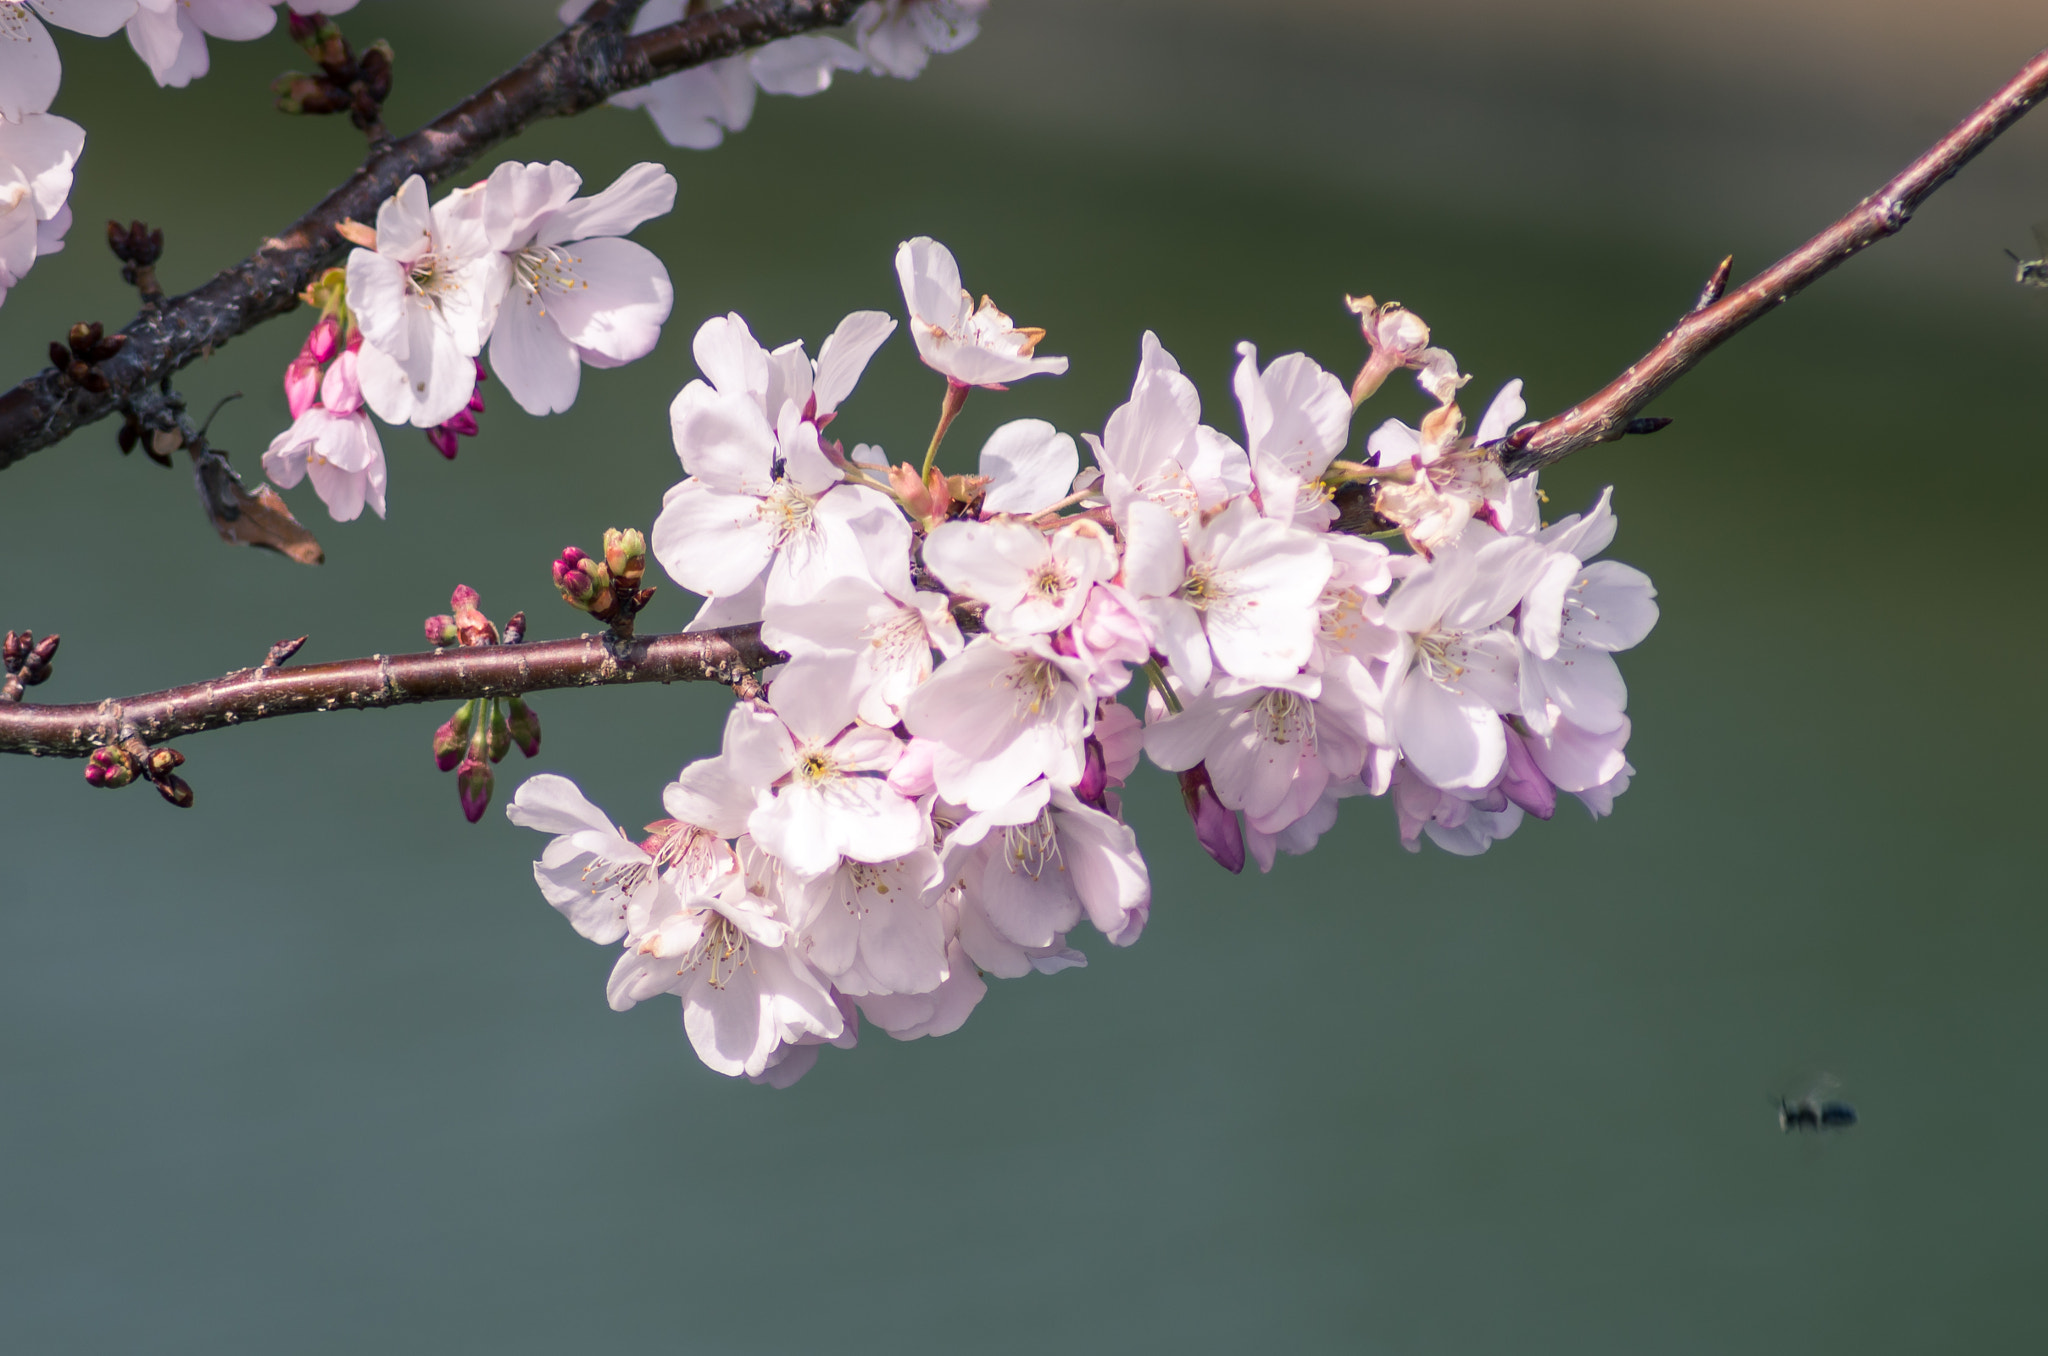 Pentax K-5 sample photo. Prime cherry blossoms photography